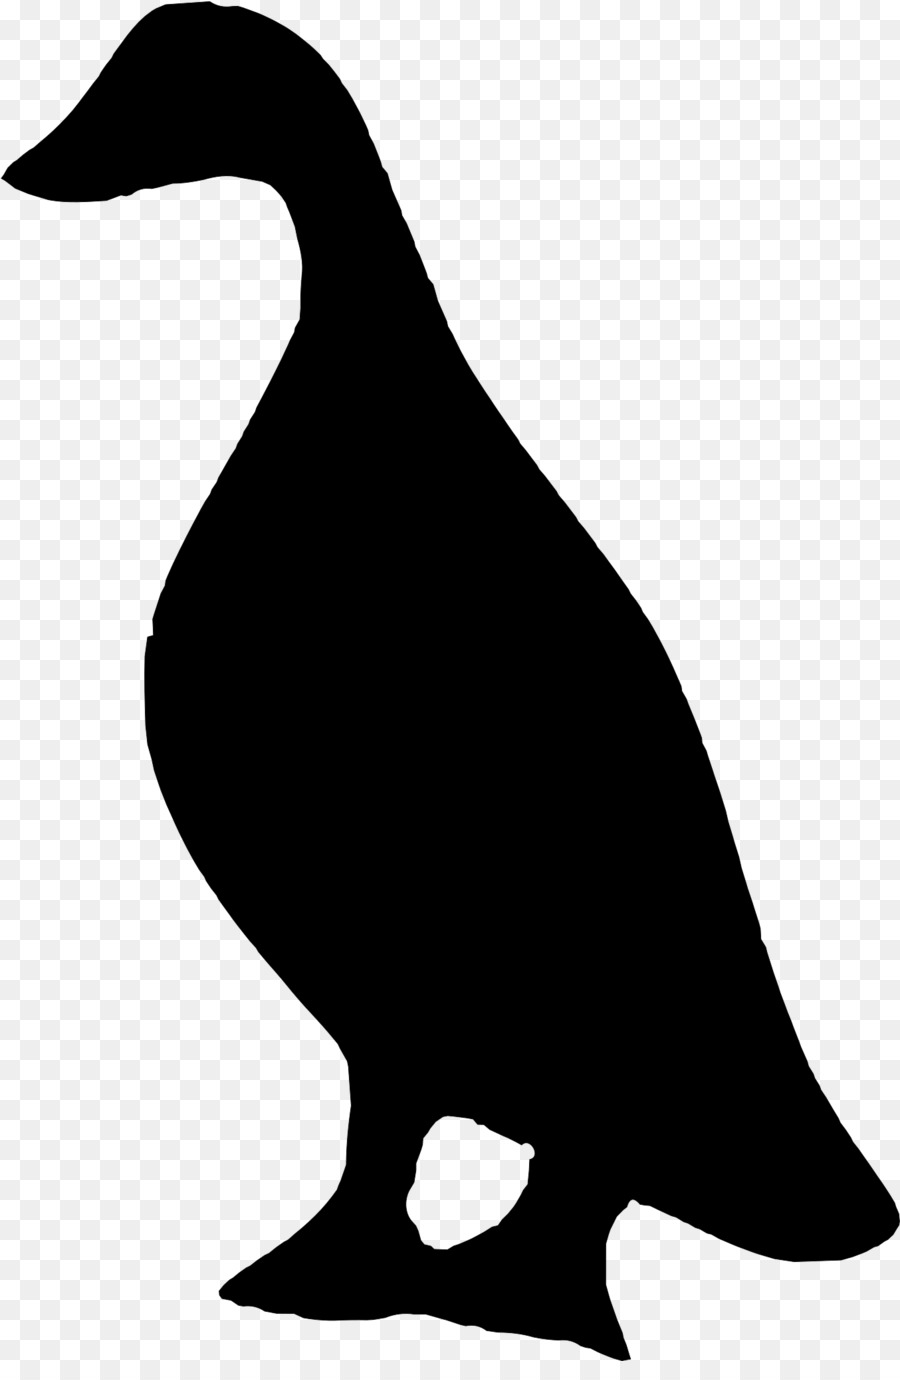 Duck Vector graphics Clip art Illustration Silhouette - duck drawing png clip png download - 1354*2048 - Free Transparent Duck png Download.